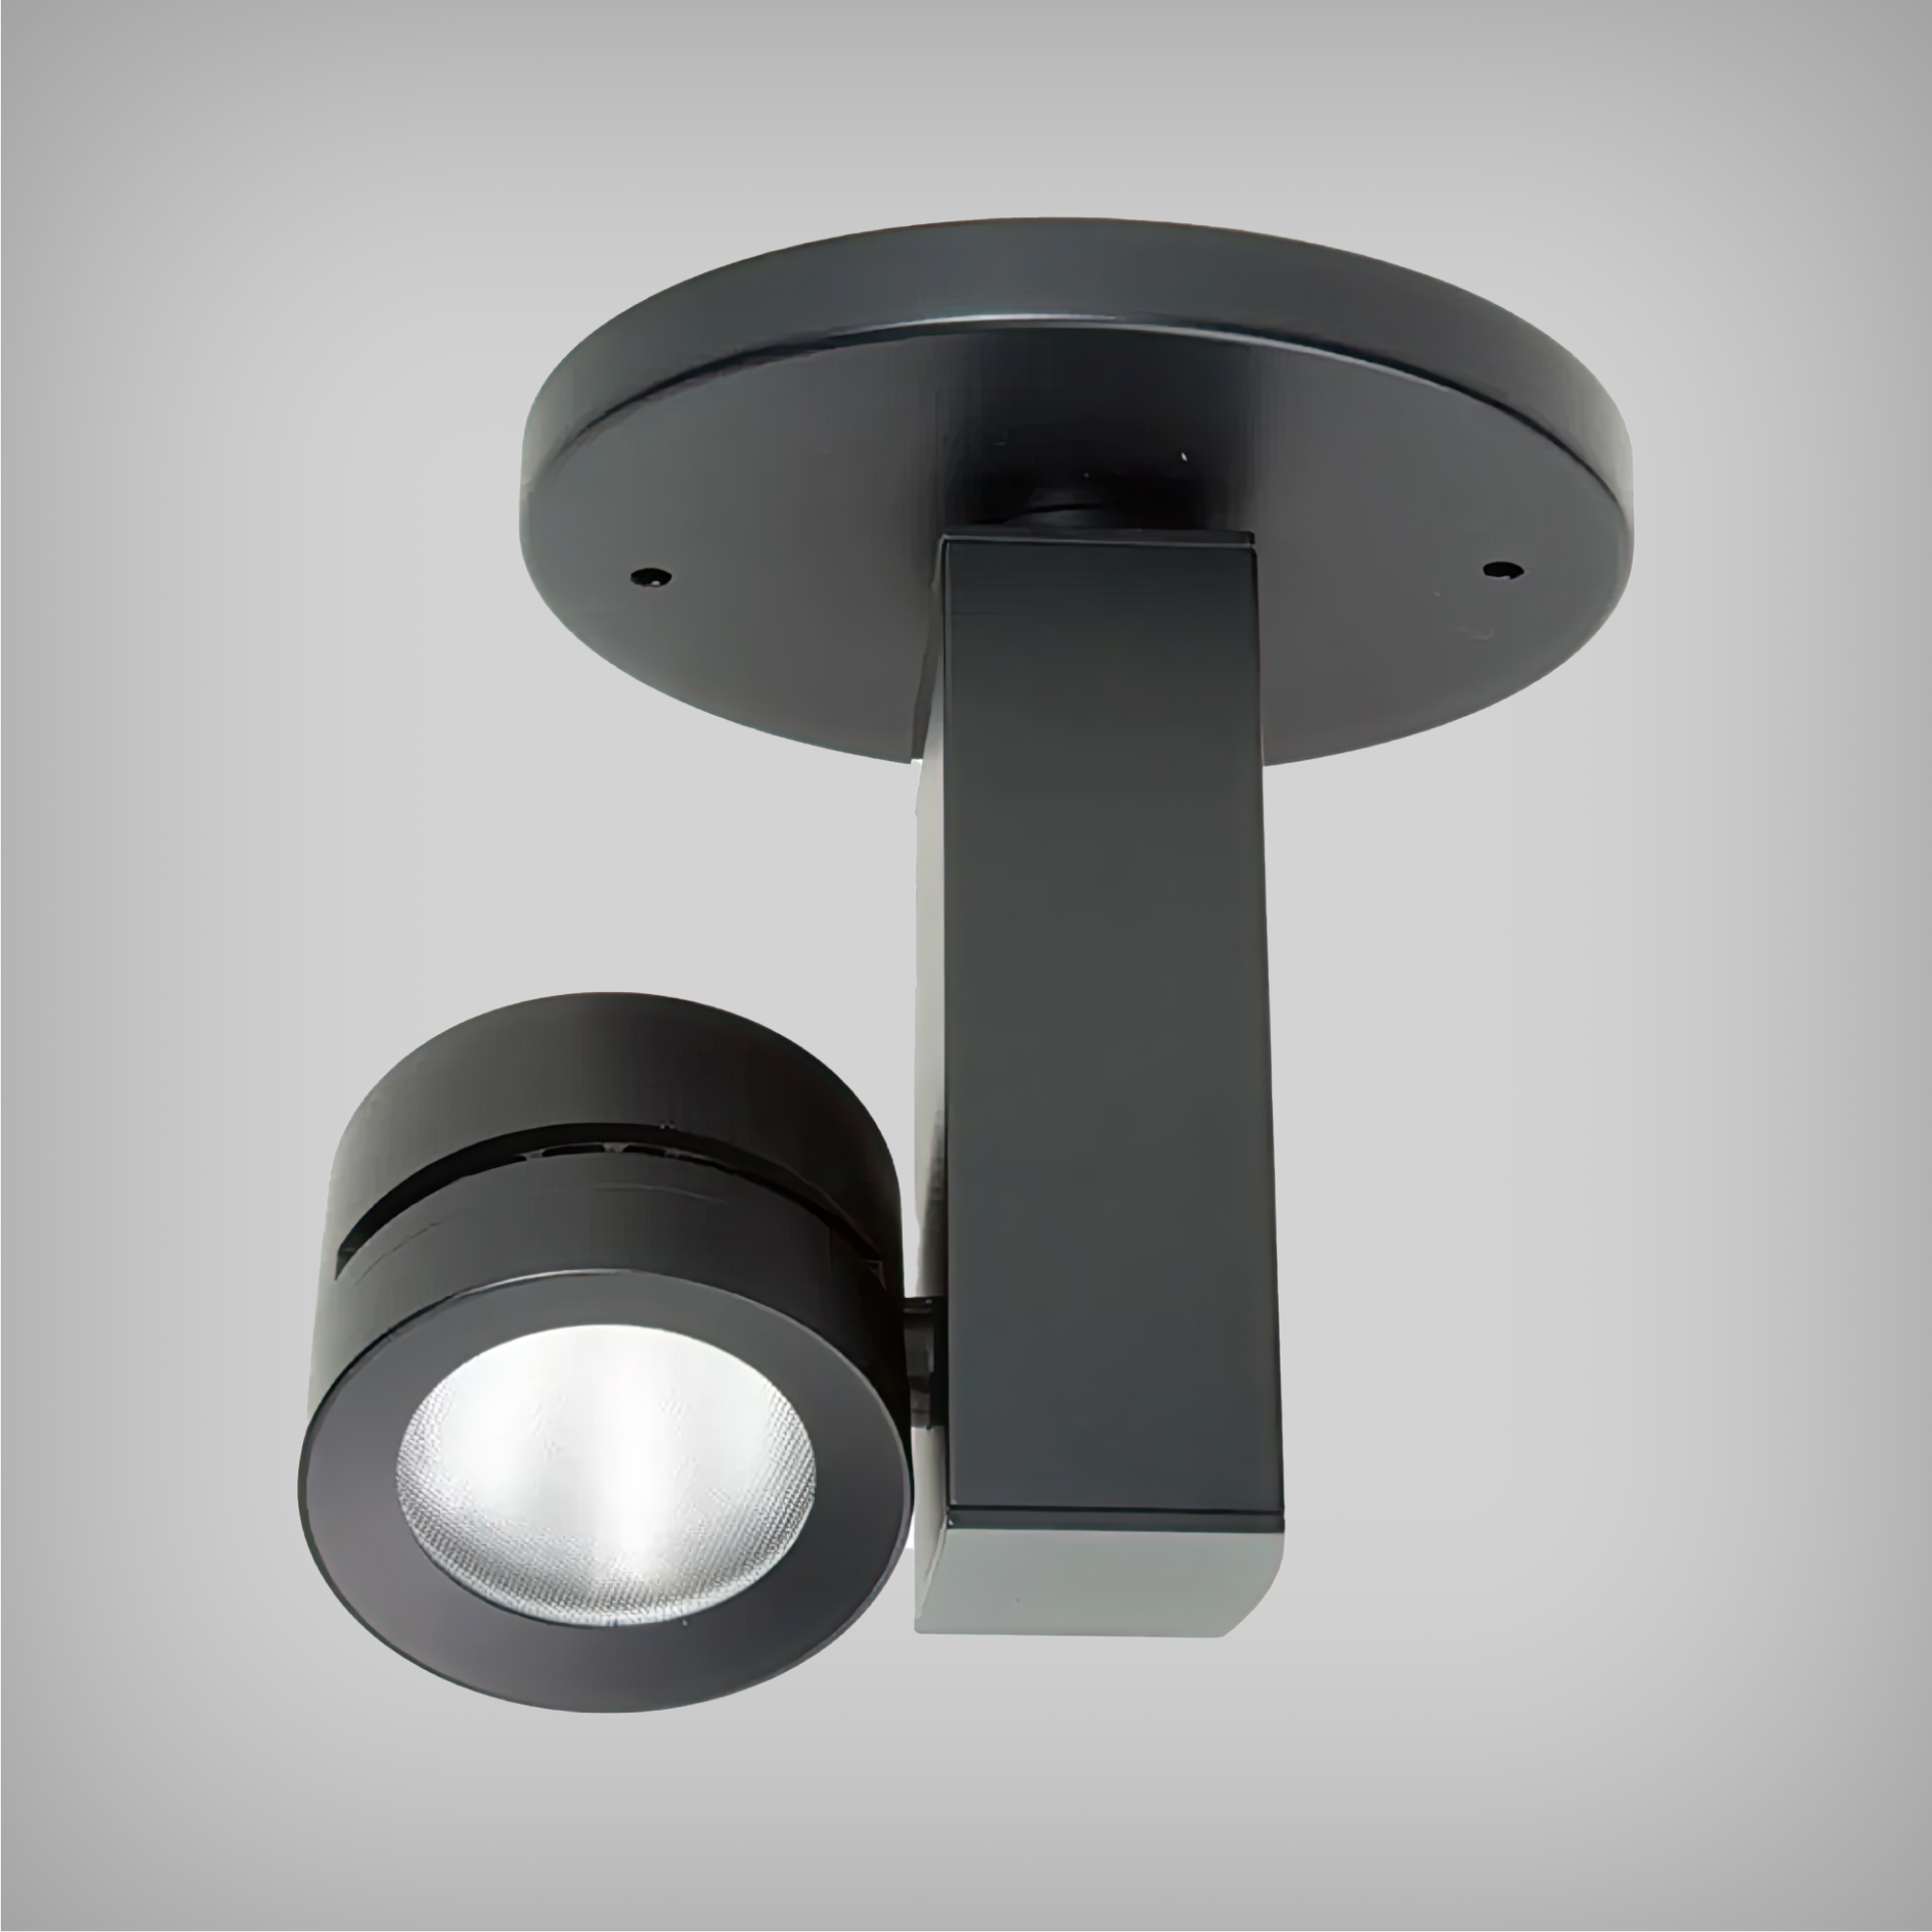 Adjustable Monopoint Light with Architectural LED, Black and White